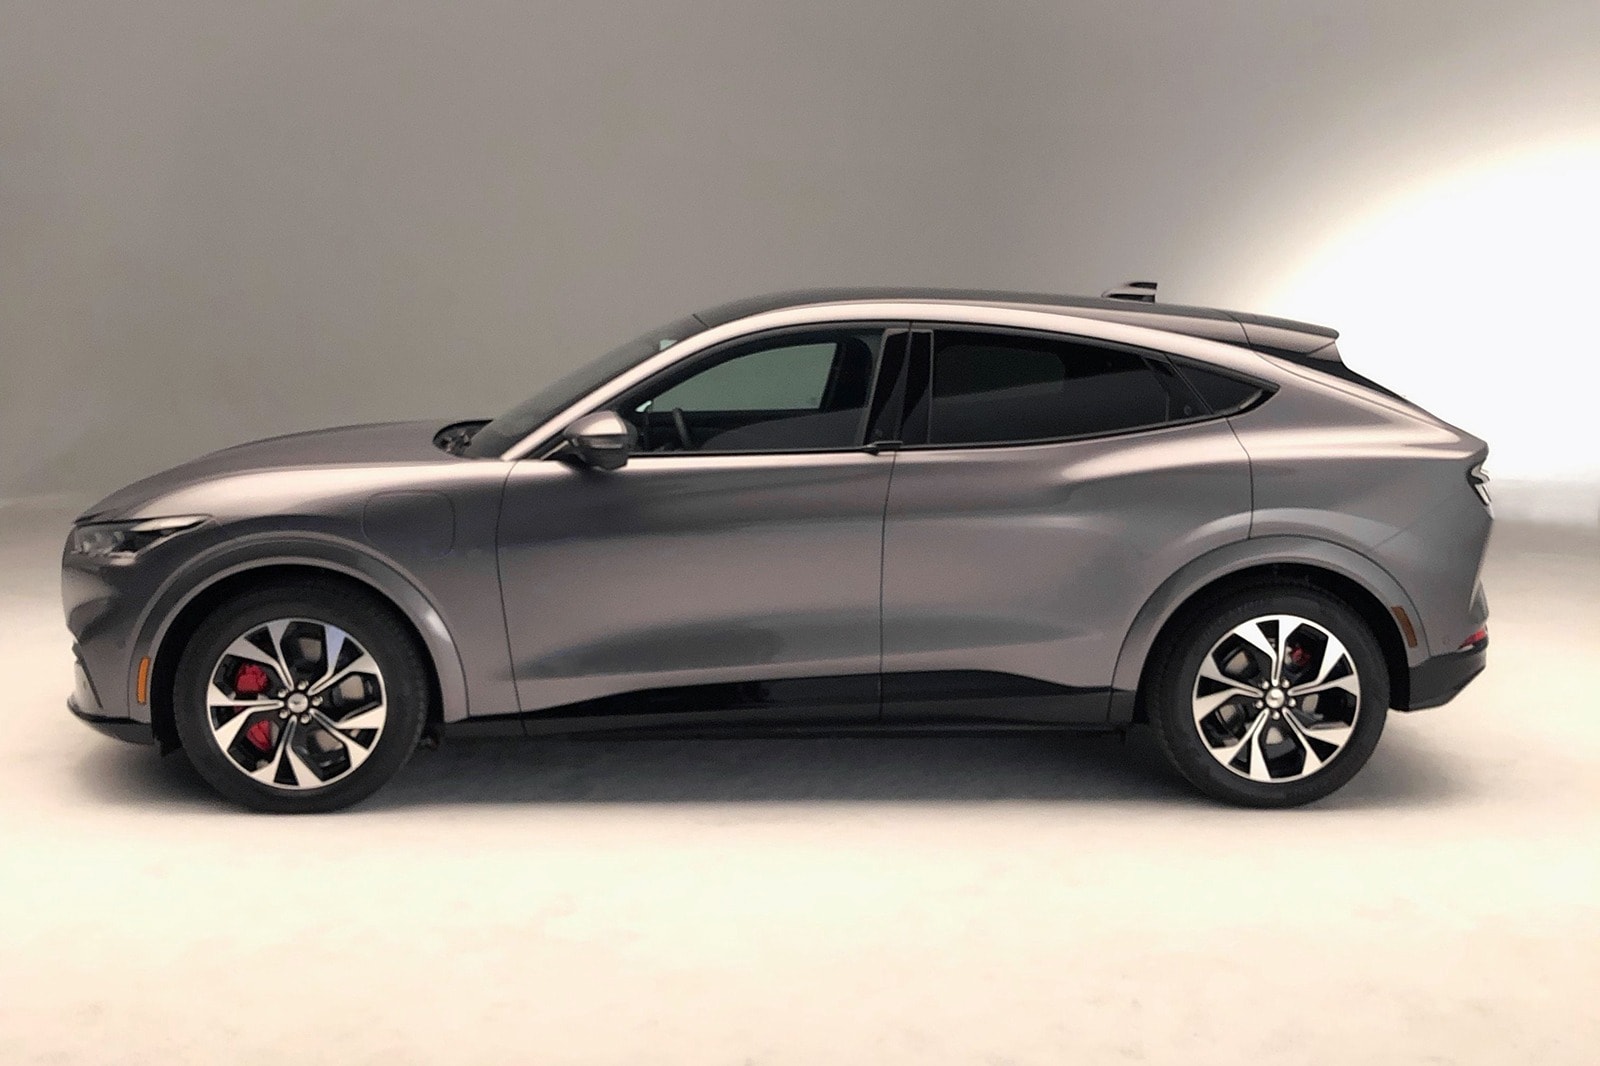 2021 Ford Mustang Mach E Suv